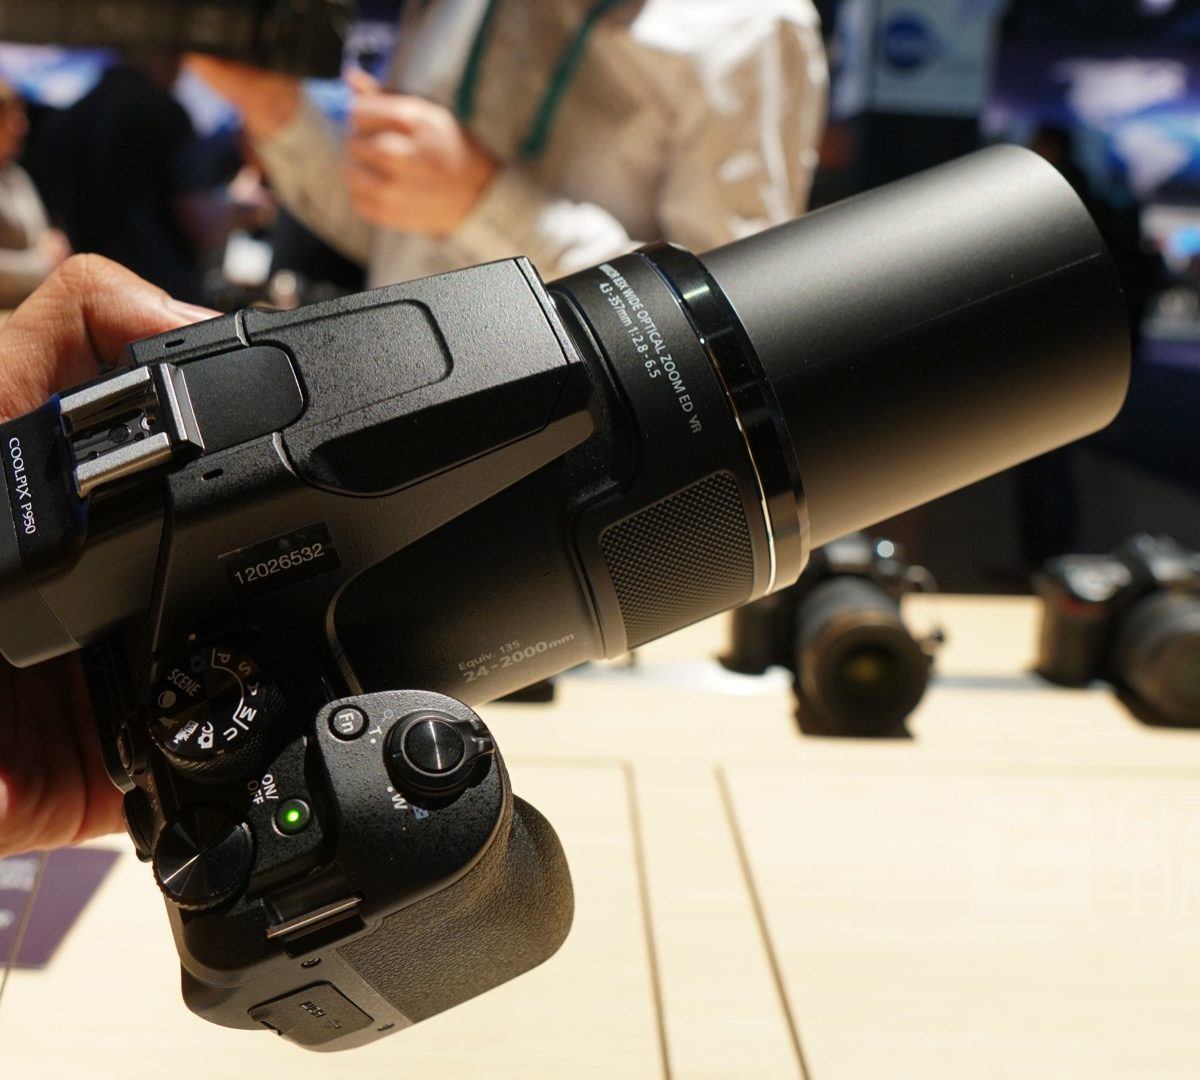 Nikon Coolpix P950 Superzoom Camera with 83x 2000mm zoom - Hands-on